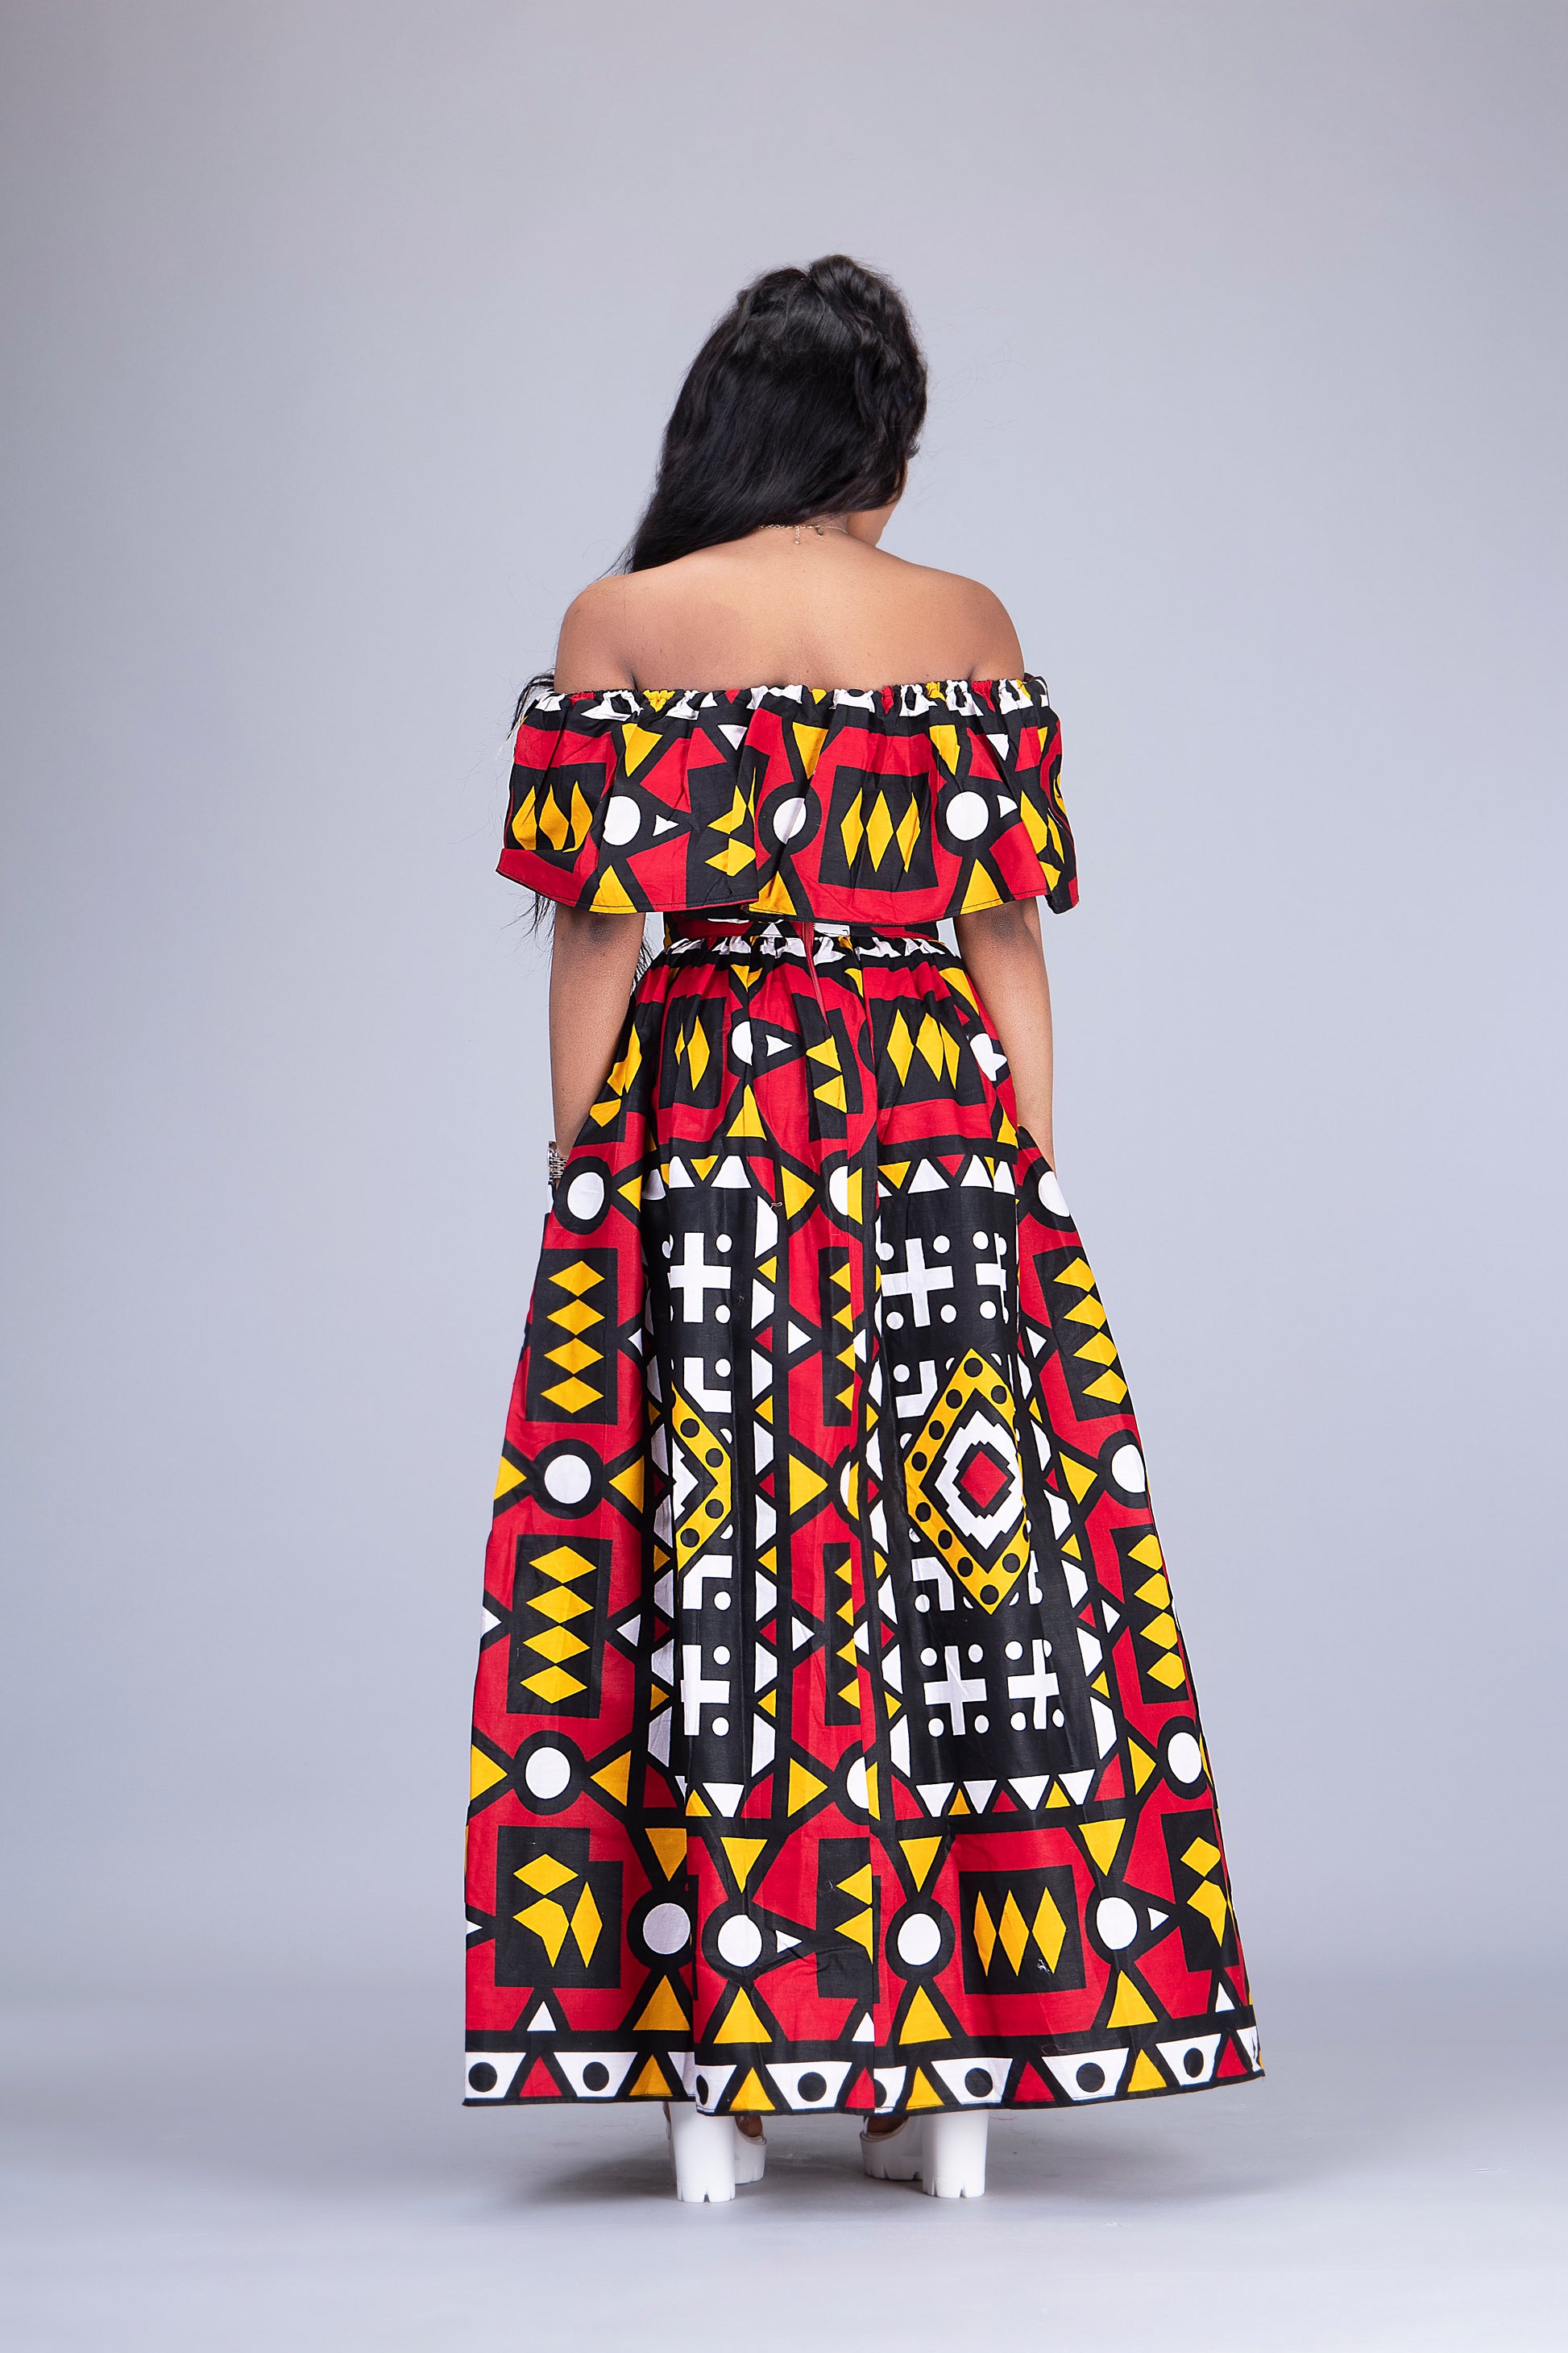 Lulu African print maxi skirt and crop top matching set / co-ord 2 piece - Afrothrone